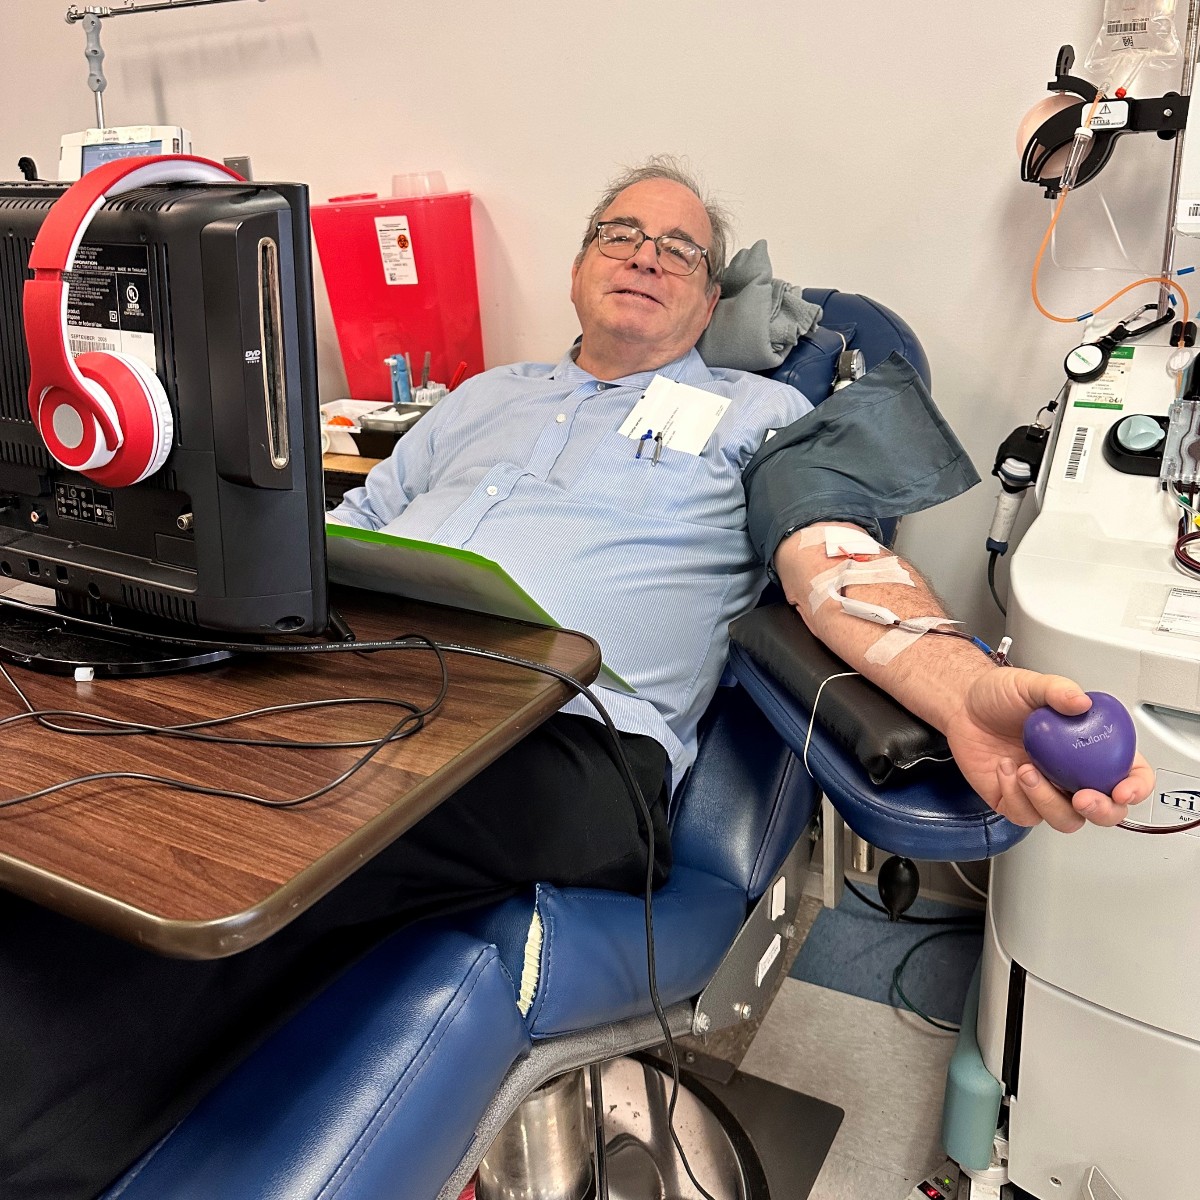 Robert took time out from his day to donate blood Thank you! He knows how important it is to give when school is about to be out. Make your commitment to helping others by making an appointment to #GIVEBLOOD in the coming days and weeks ahead. vitalant.org